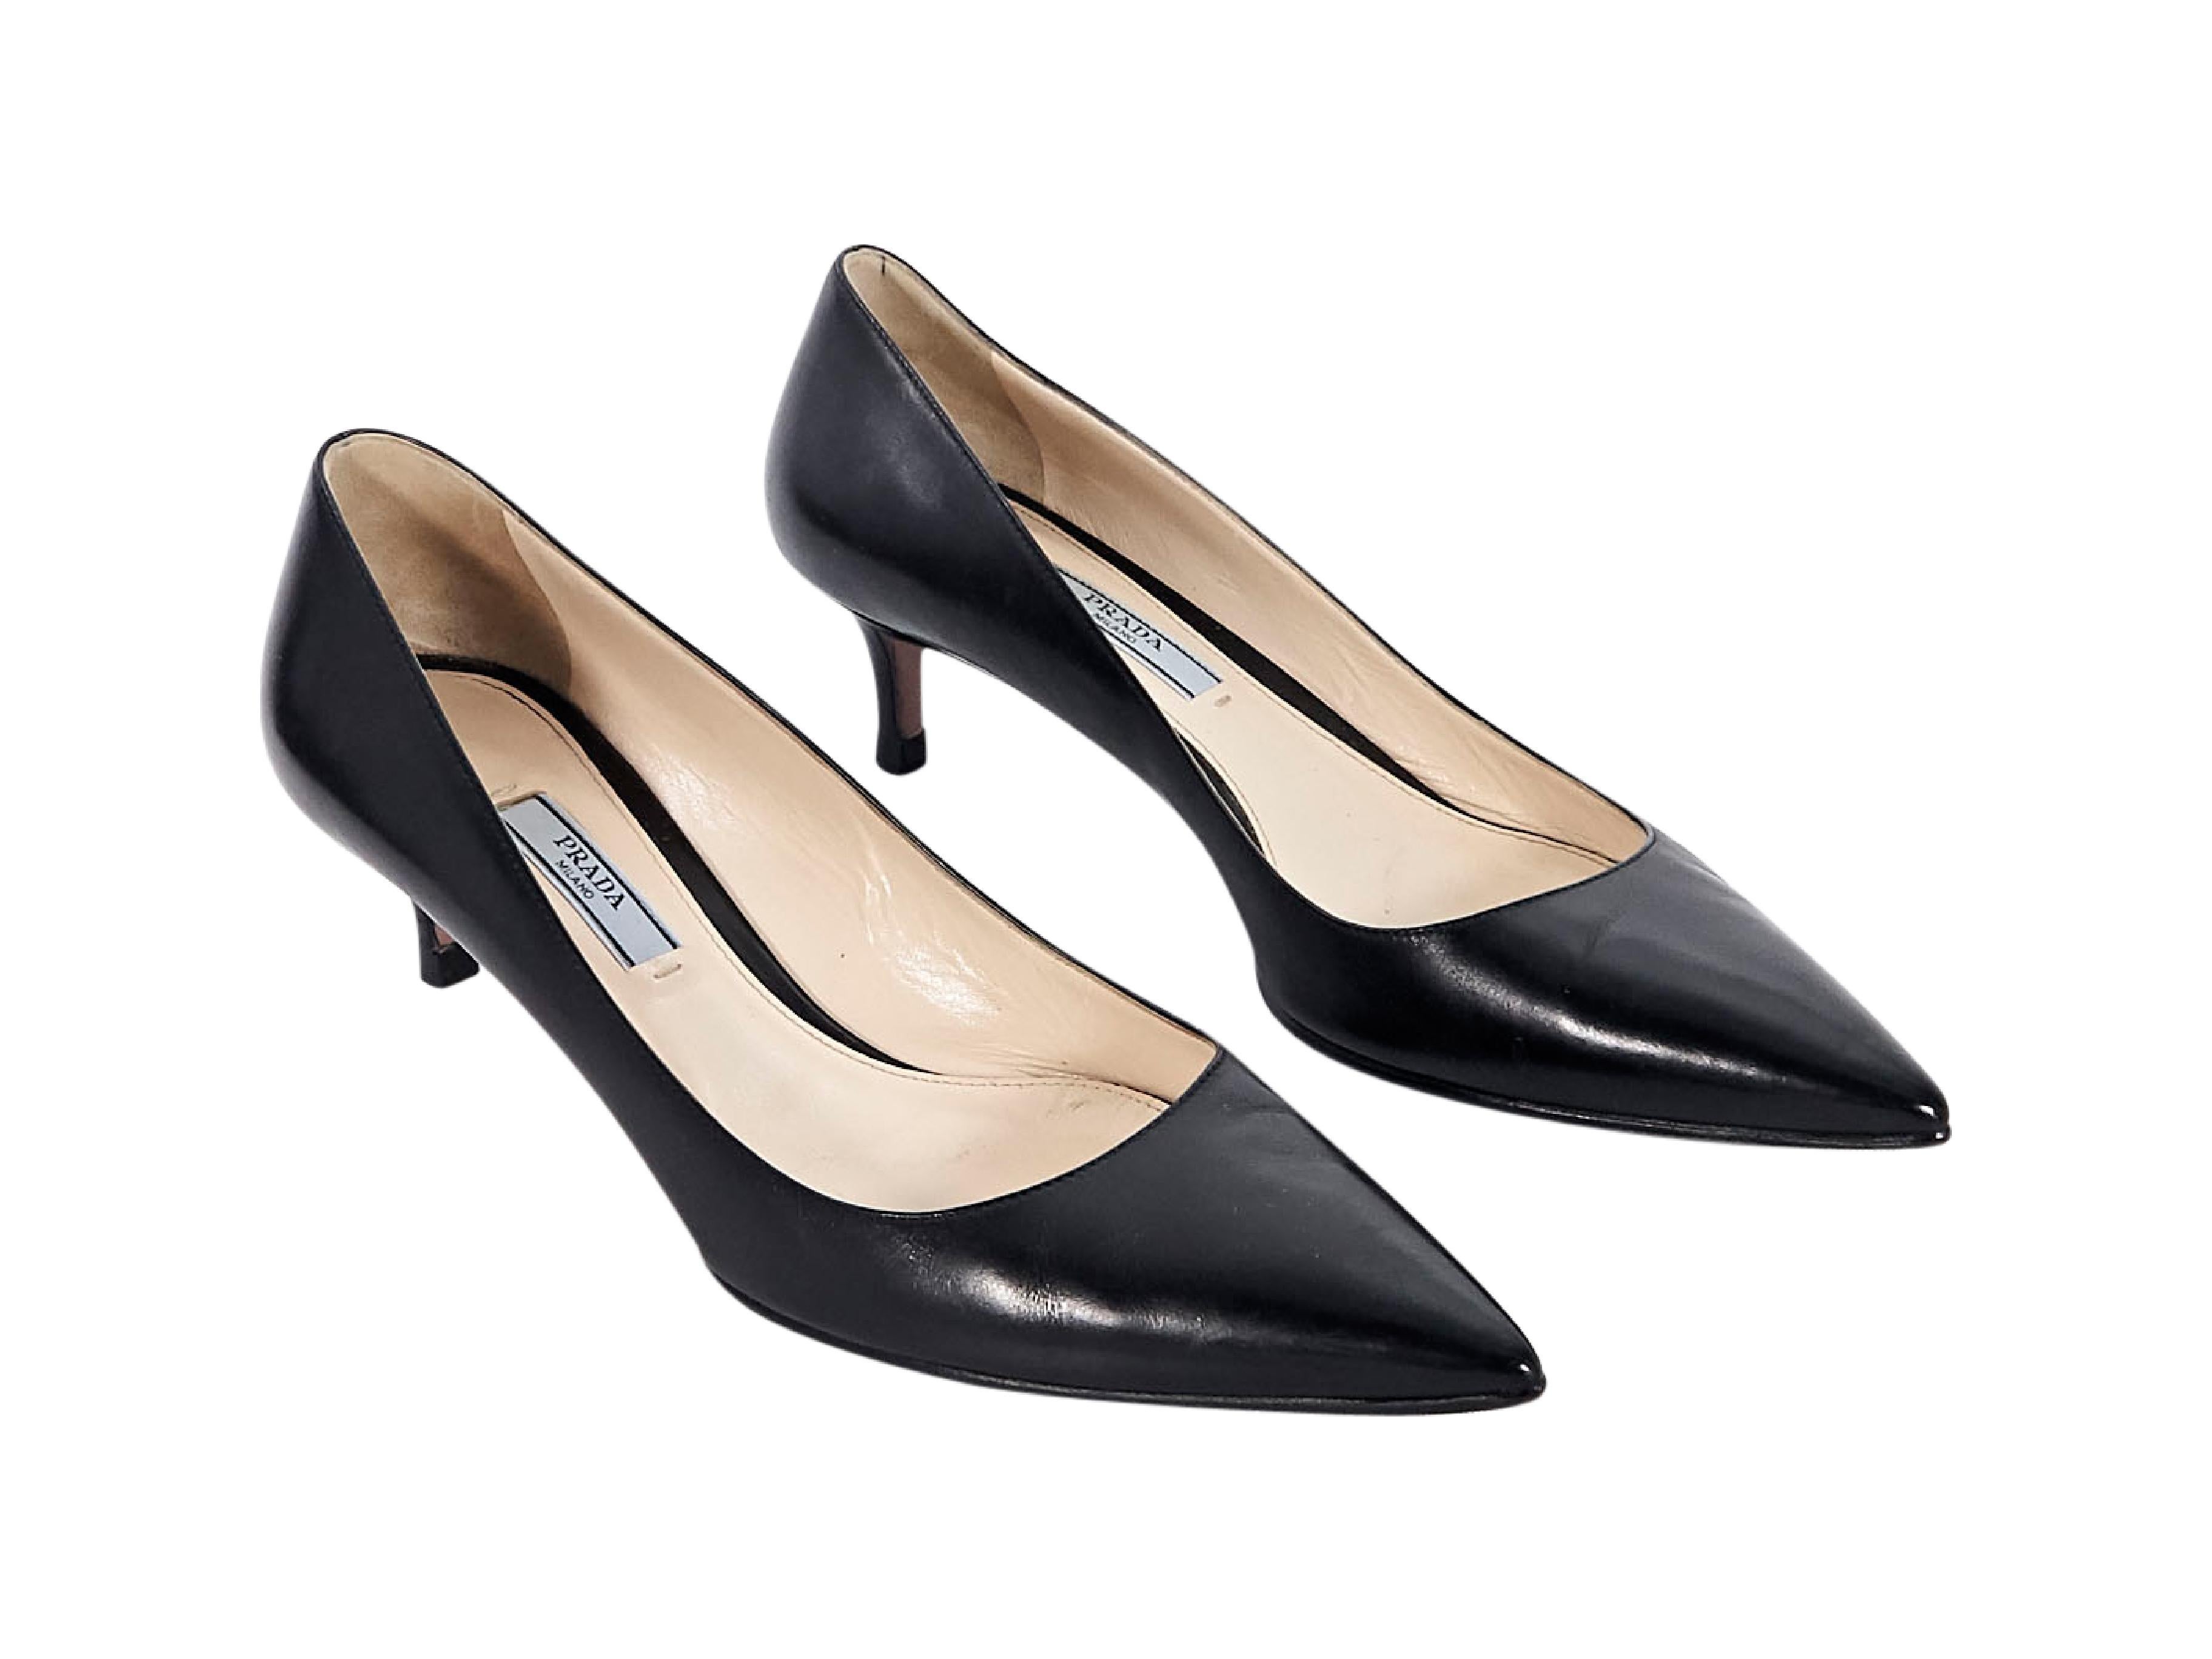 Product details:  Black leather kitten heel pumps by Prada.  Point toe.  Slip-on style.  2